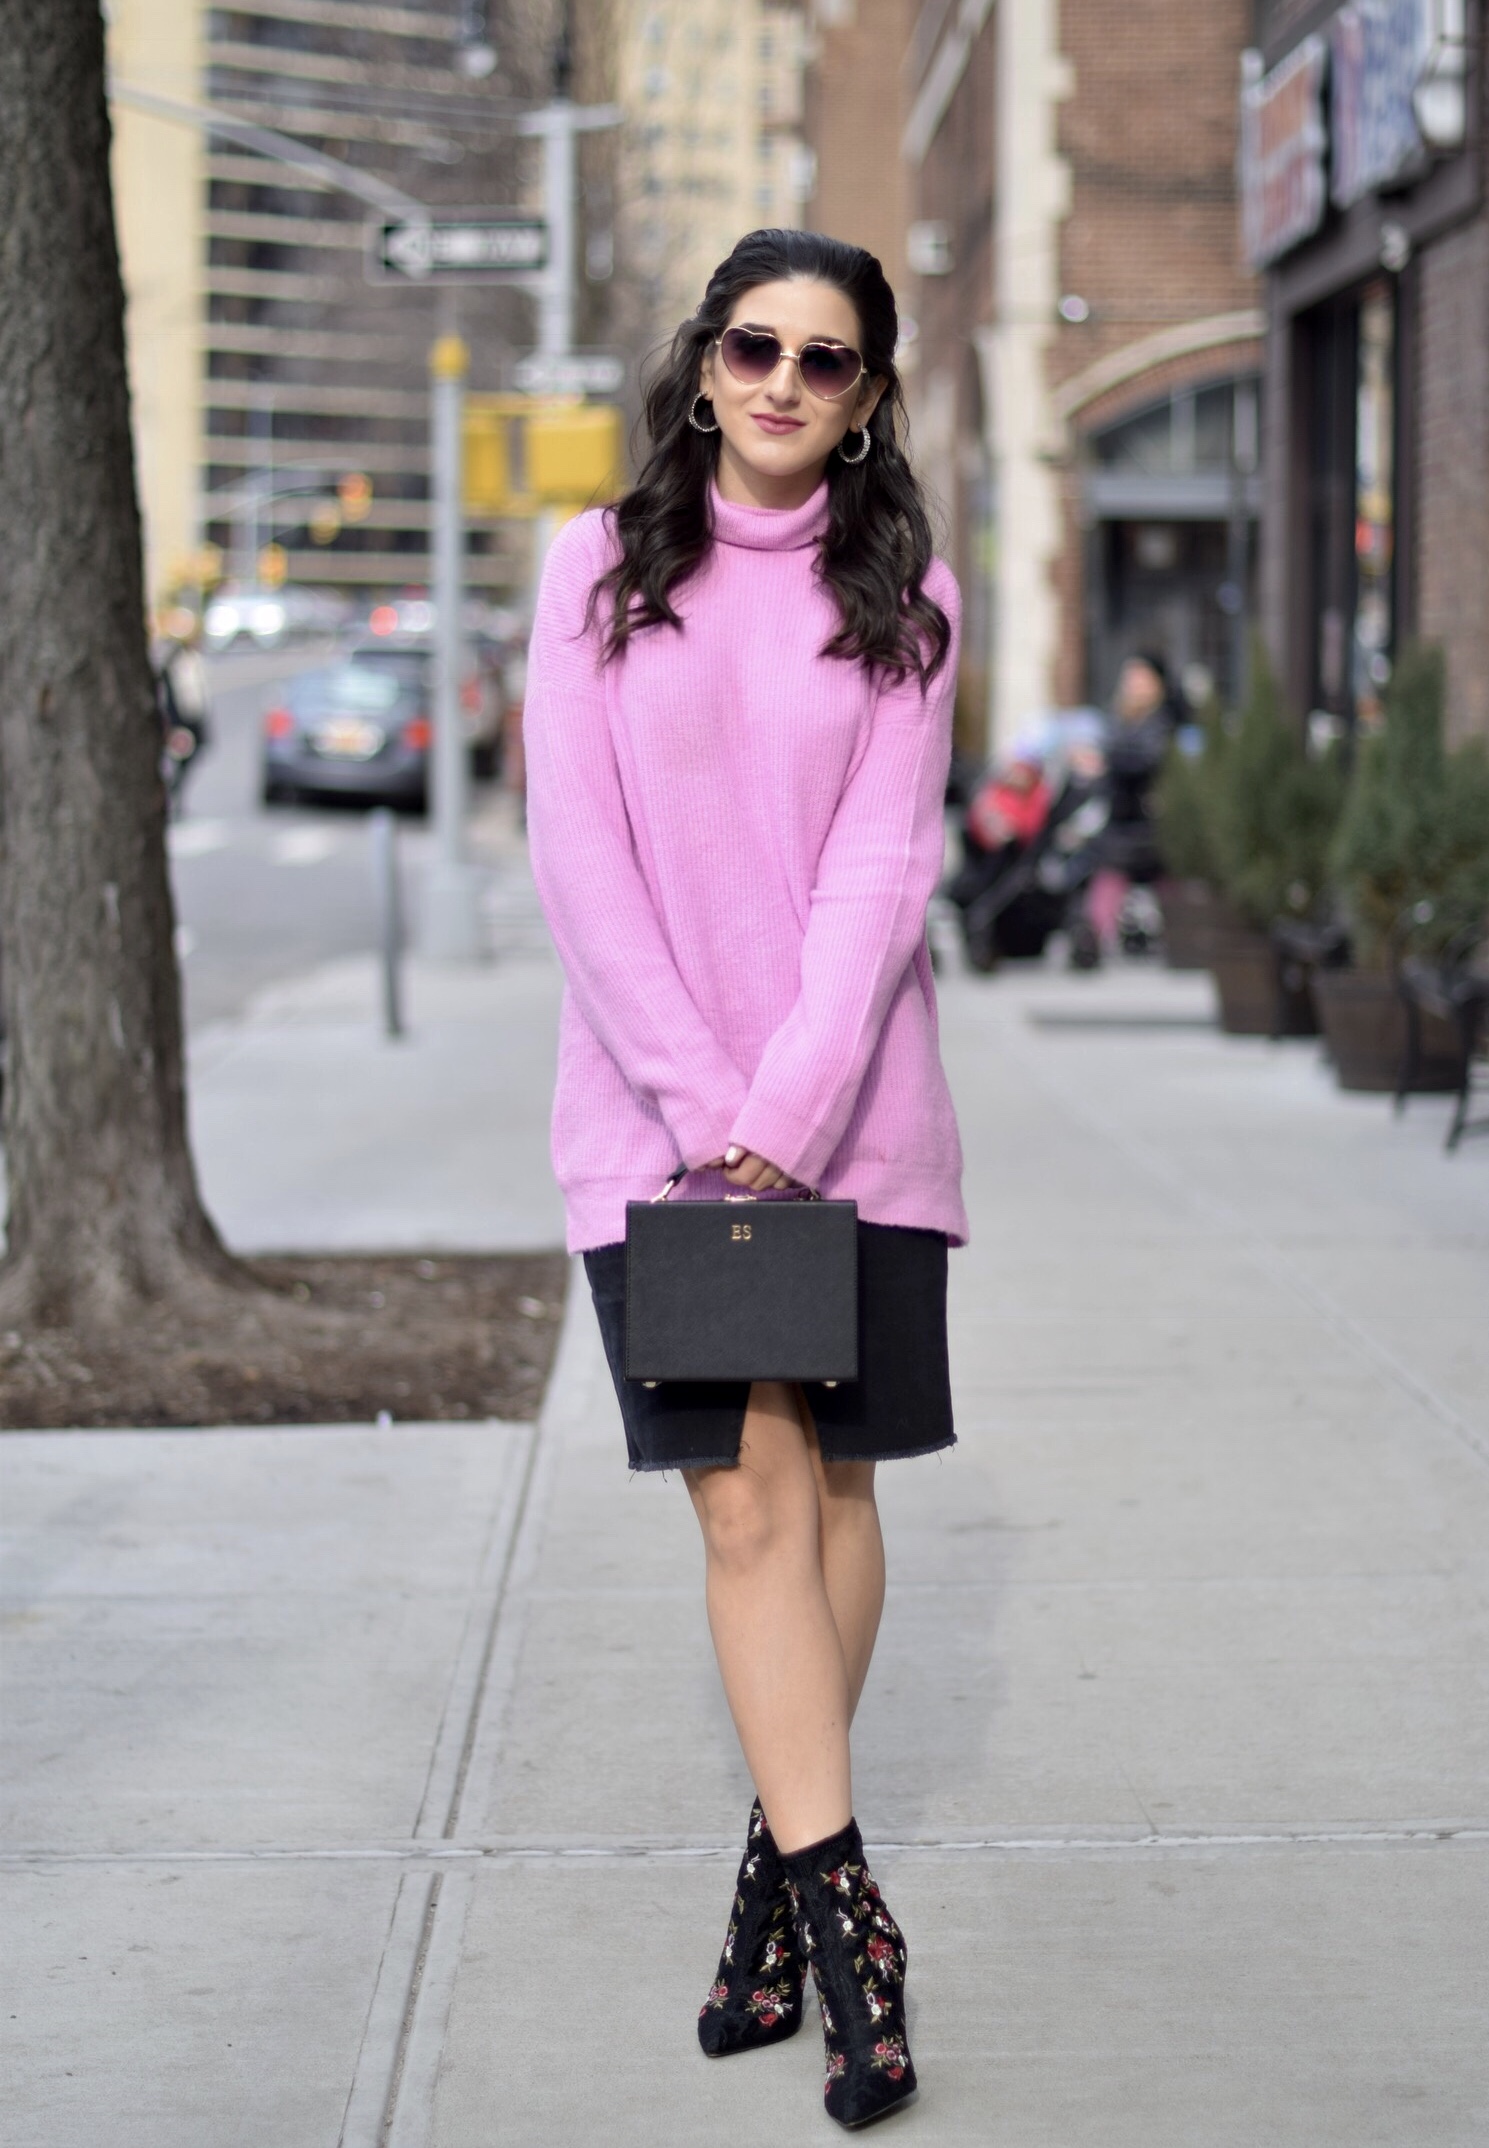 Surviving Winter With ASOS 5 Hardest Parts Of Blogging Esther Santer Fashion Blog NYC Street Style Blogger Outfit OOTD Trendy Pink Sweater Black Denim Skirt Box Bag Floral Booties Betsey Johnson Girl Women Purse Heart Sunglasses  Booties Accesories.jpg